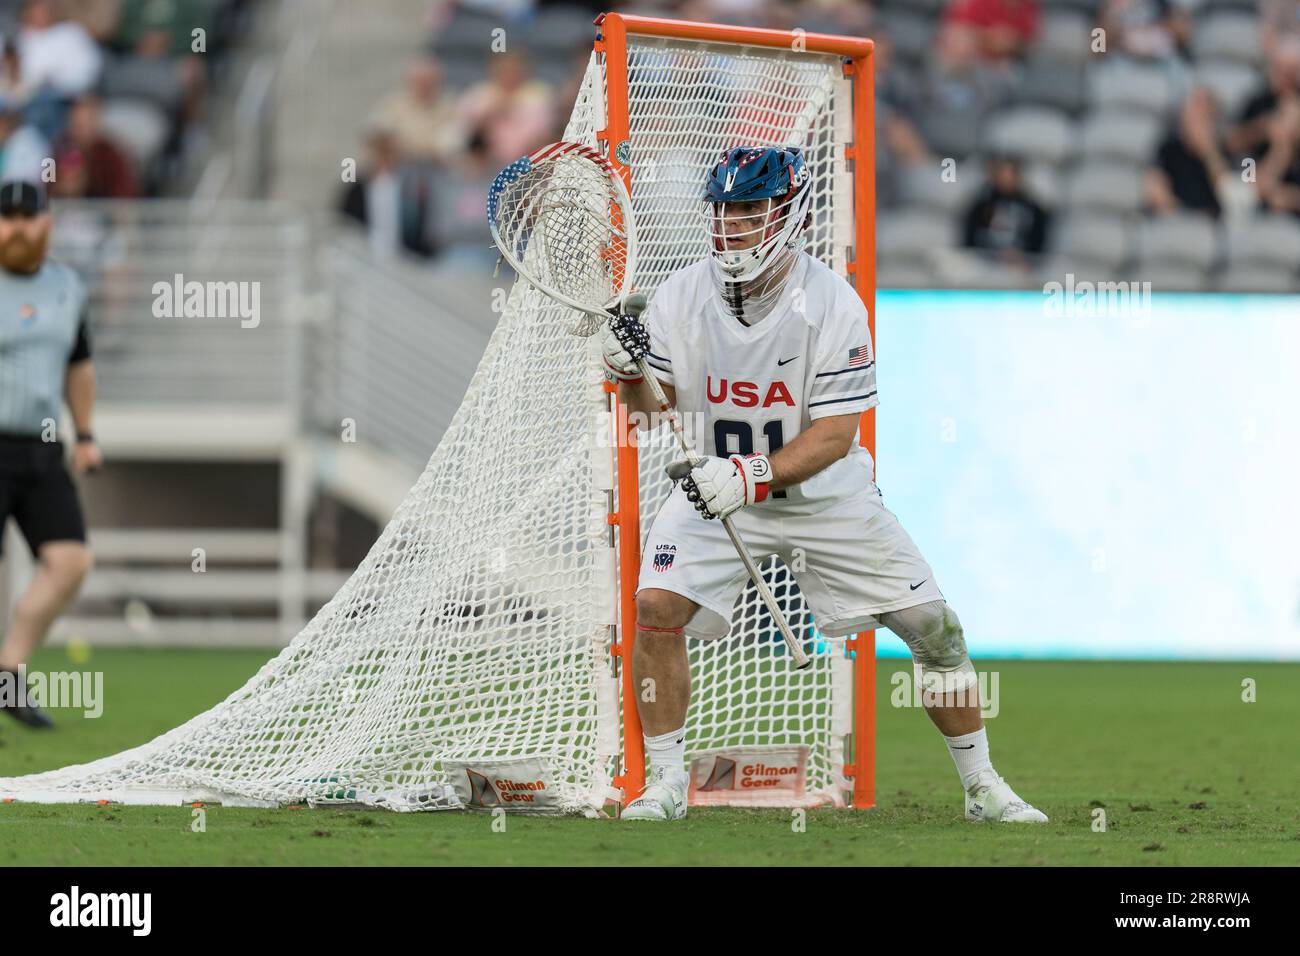 San Diego, USA. 21st June, 2023. Jack Kelly (91) in net for USA at the World Lacrosse Men's Championship opening game USA vs Canada at Snapdragon Stadium. Credit: Ben Nichols/Alamy Live News Stock Photo